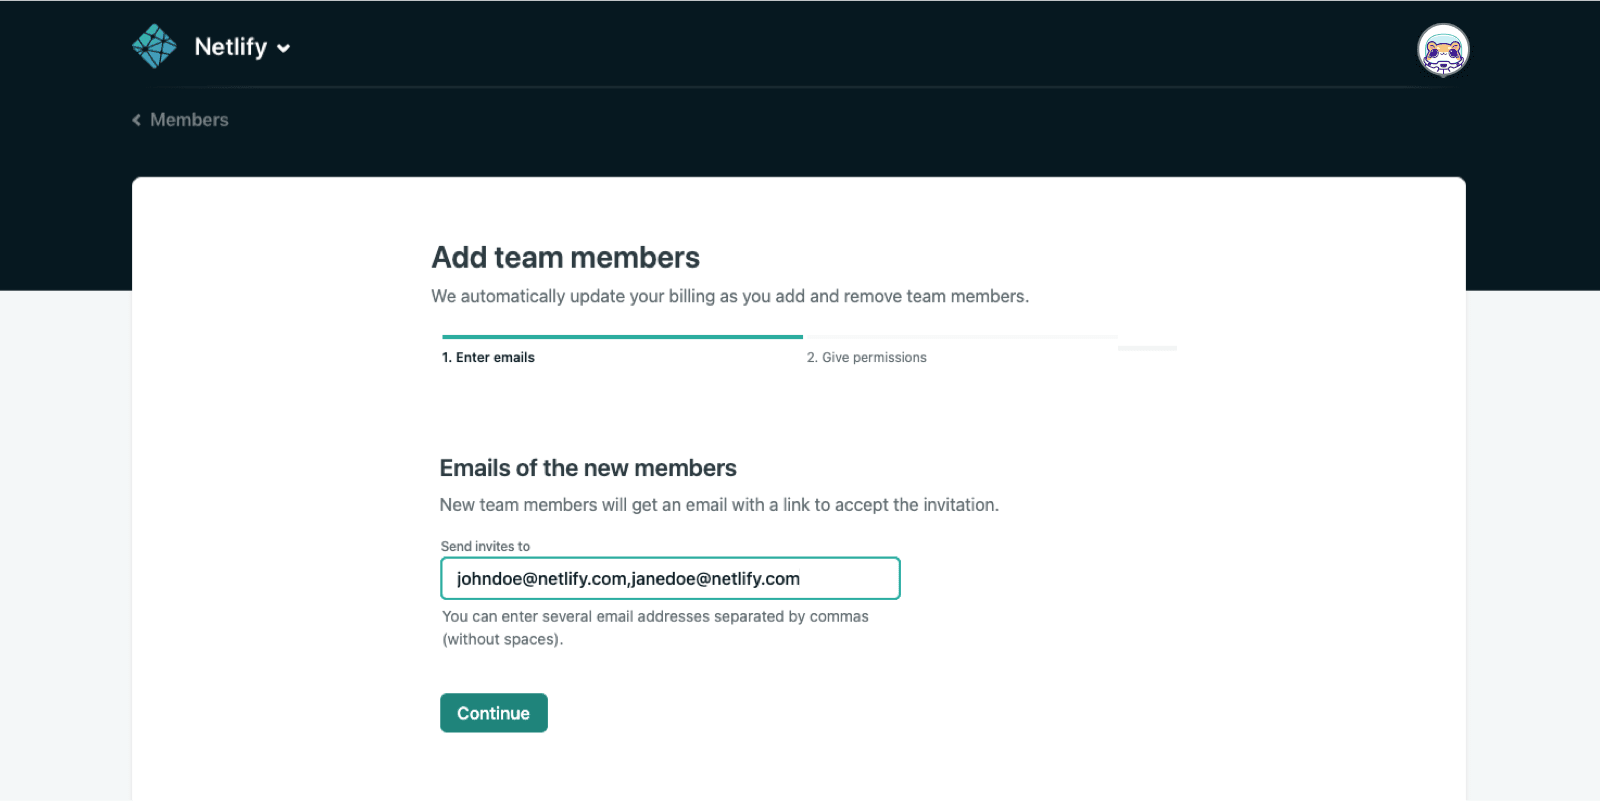 Interface to add team members asks for the emails of the new members.